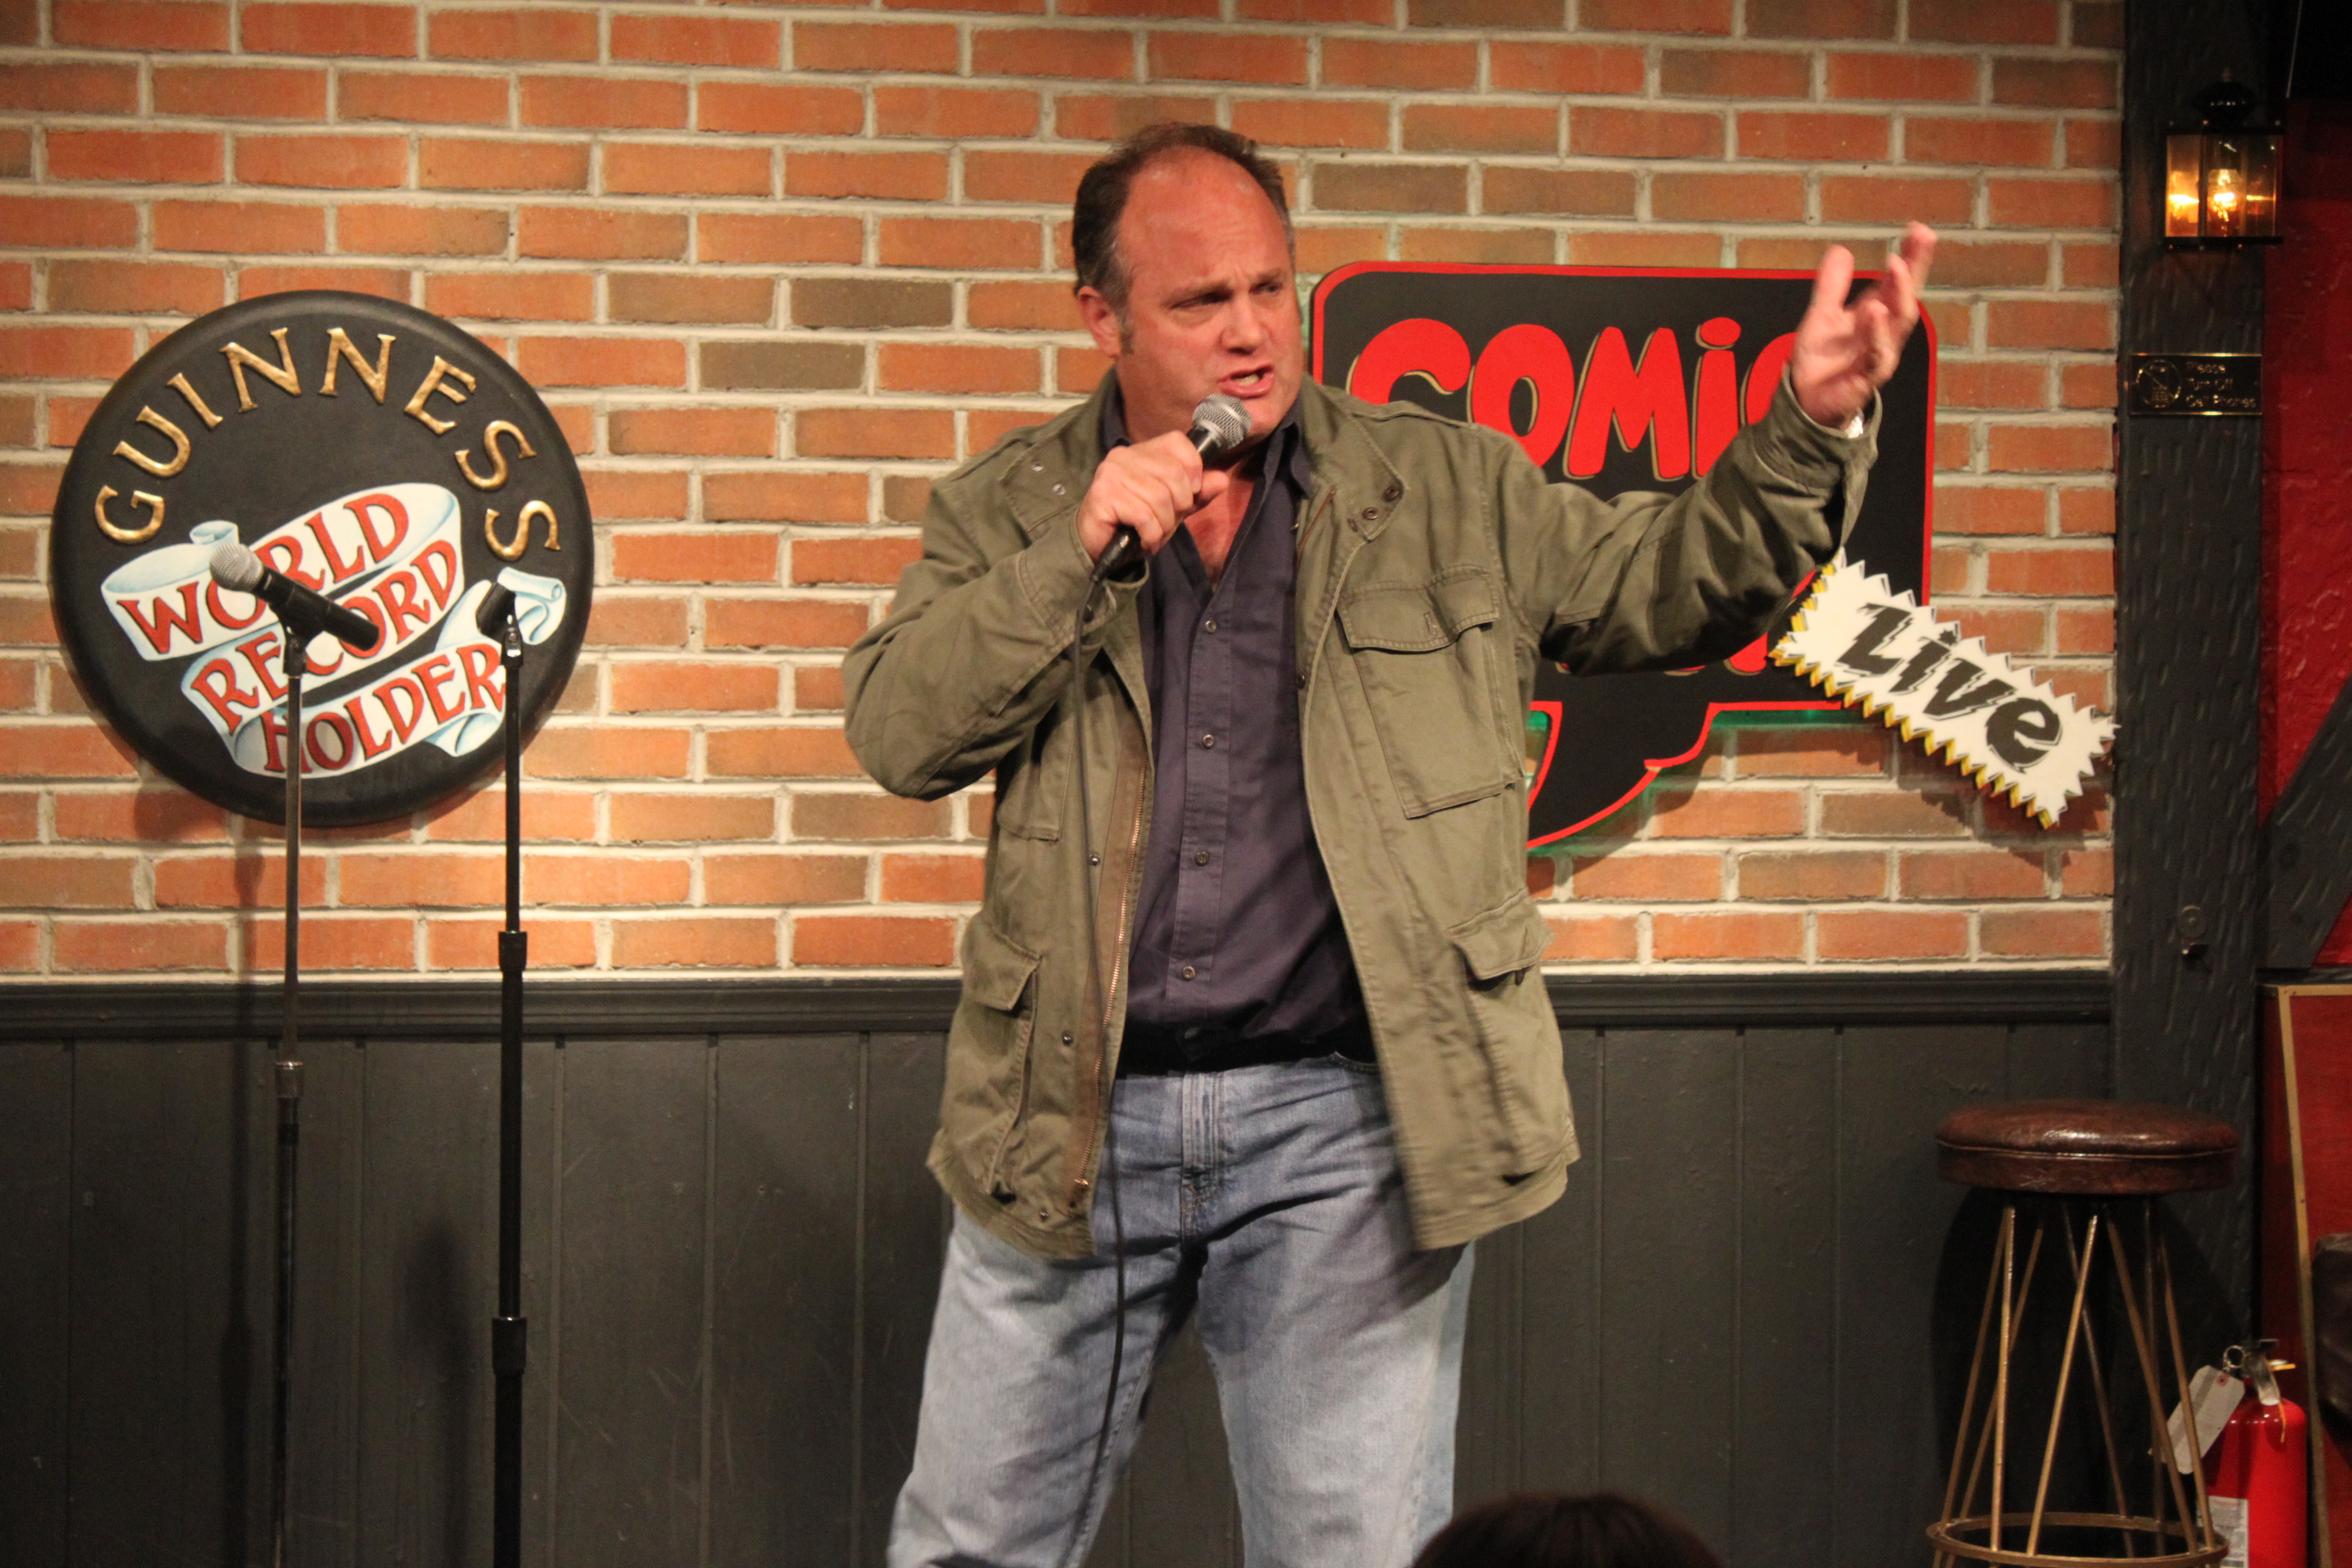 On stage at the Comic Strip, NYC